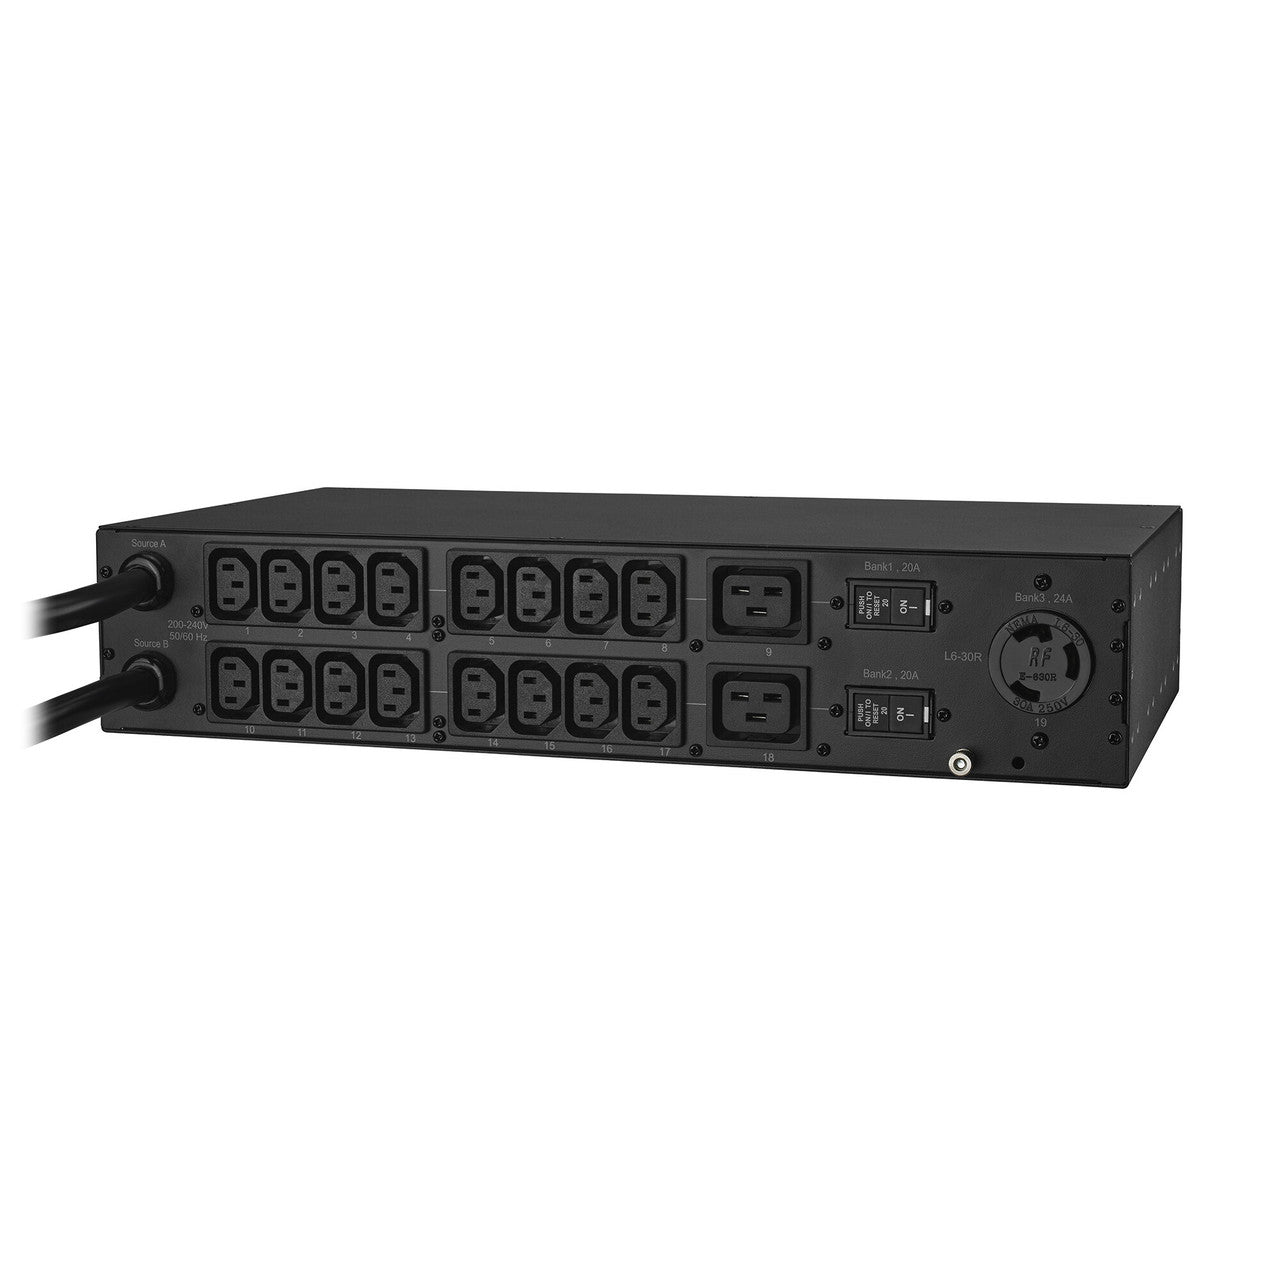 CyberPower PDU30MHVT19AT 30A (Derated to 24A), 200 - 240 V, 2x L6-30P plugs, 19 rear